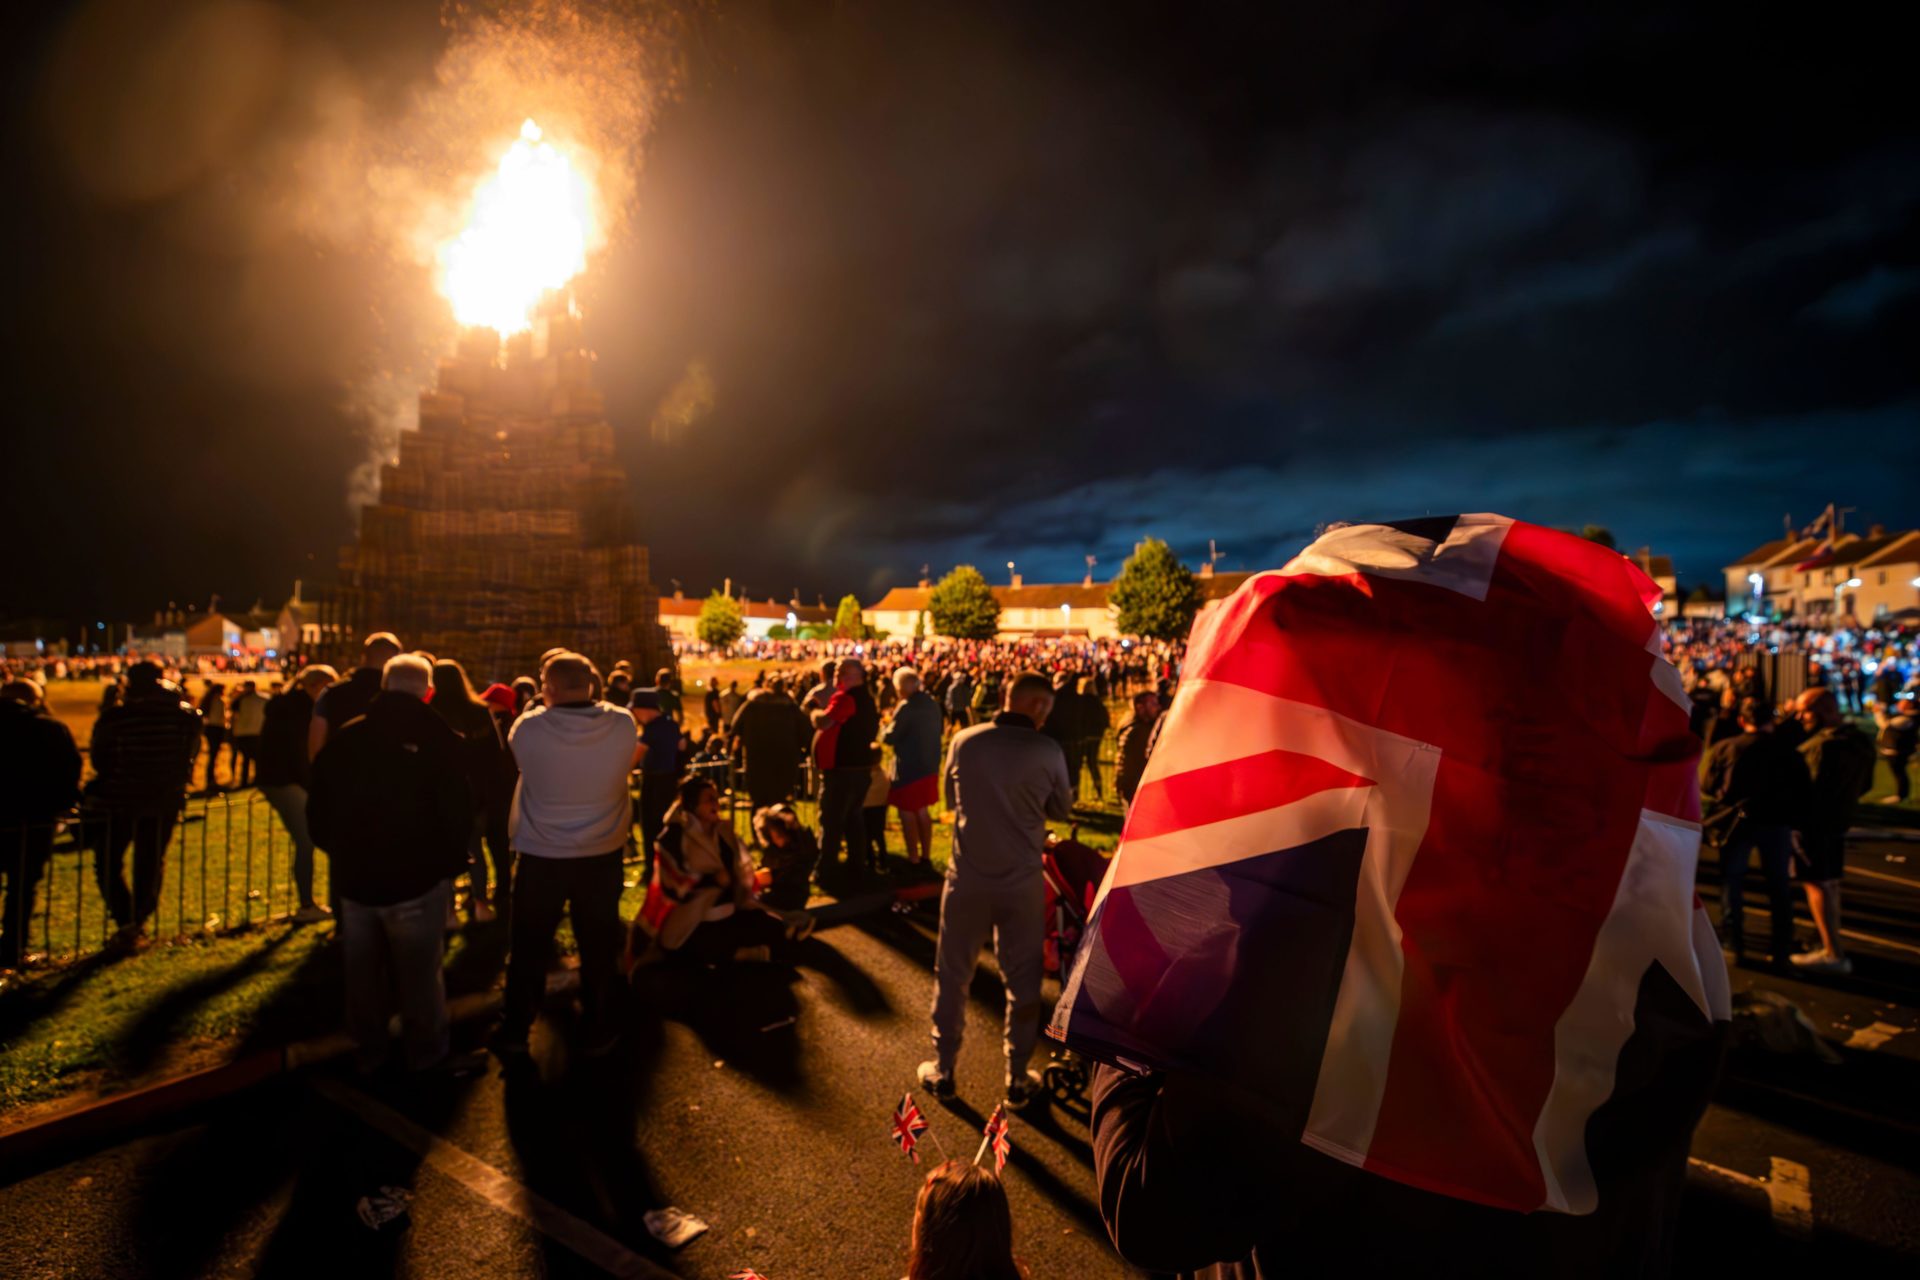 People watch the burning of the loyalist Corcrain bonfire in Portadown, Co Armagh. One person carries a British flag on their back.